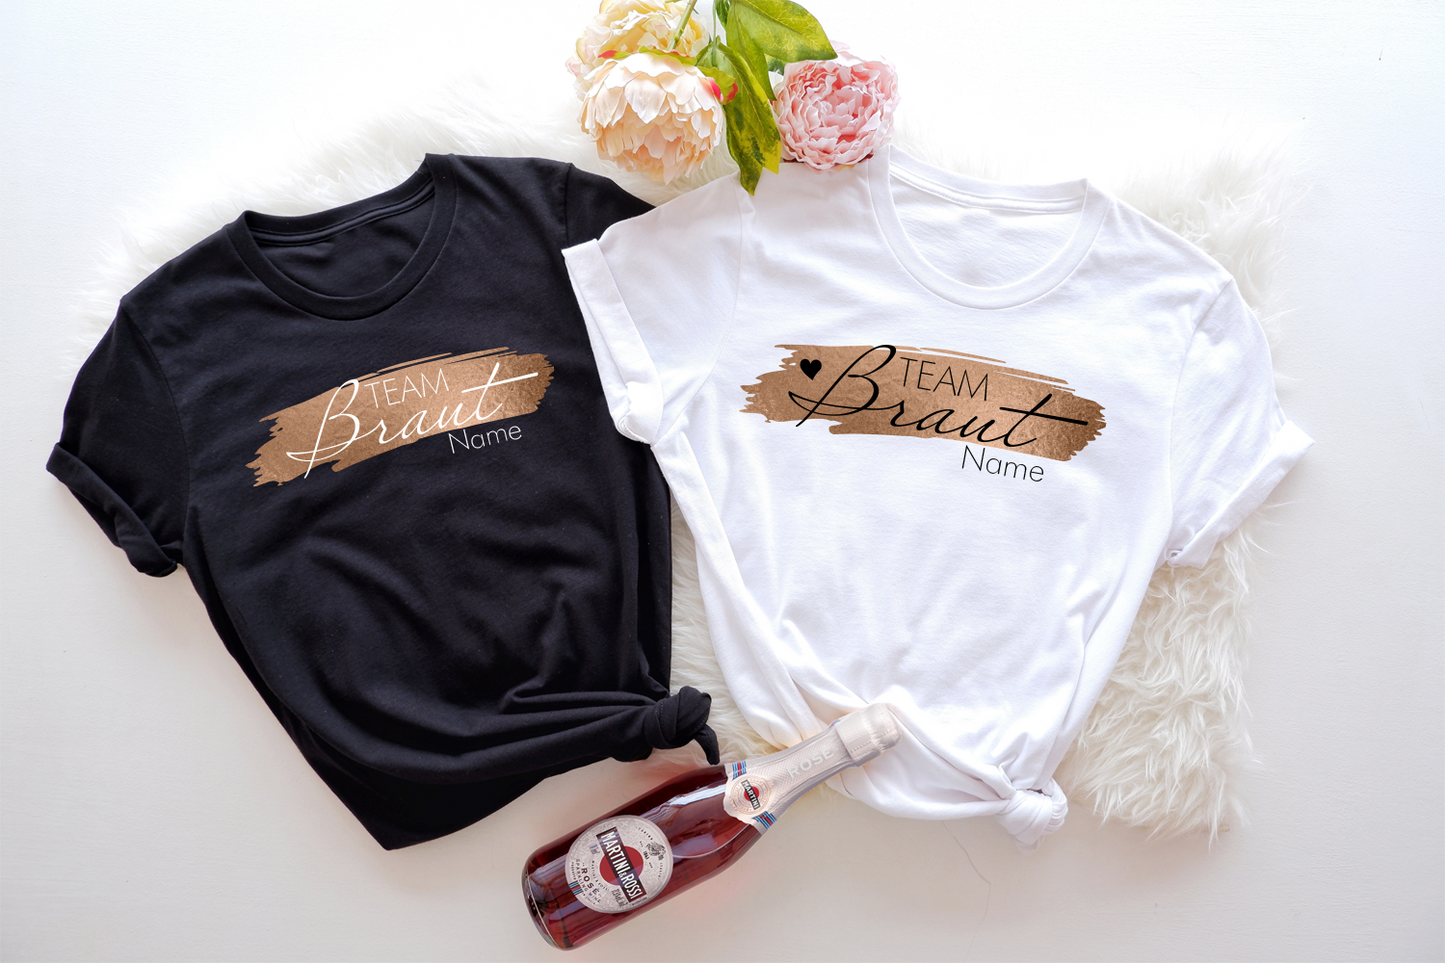 Create unforgettable memories and make your JGA (Junggesellenabschied) celebration truly special with personalized JGA t-shirts.